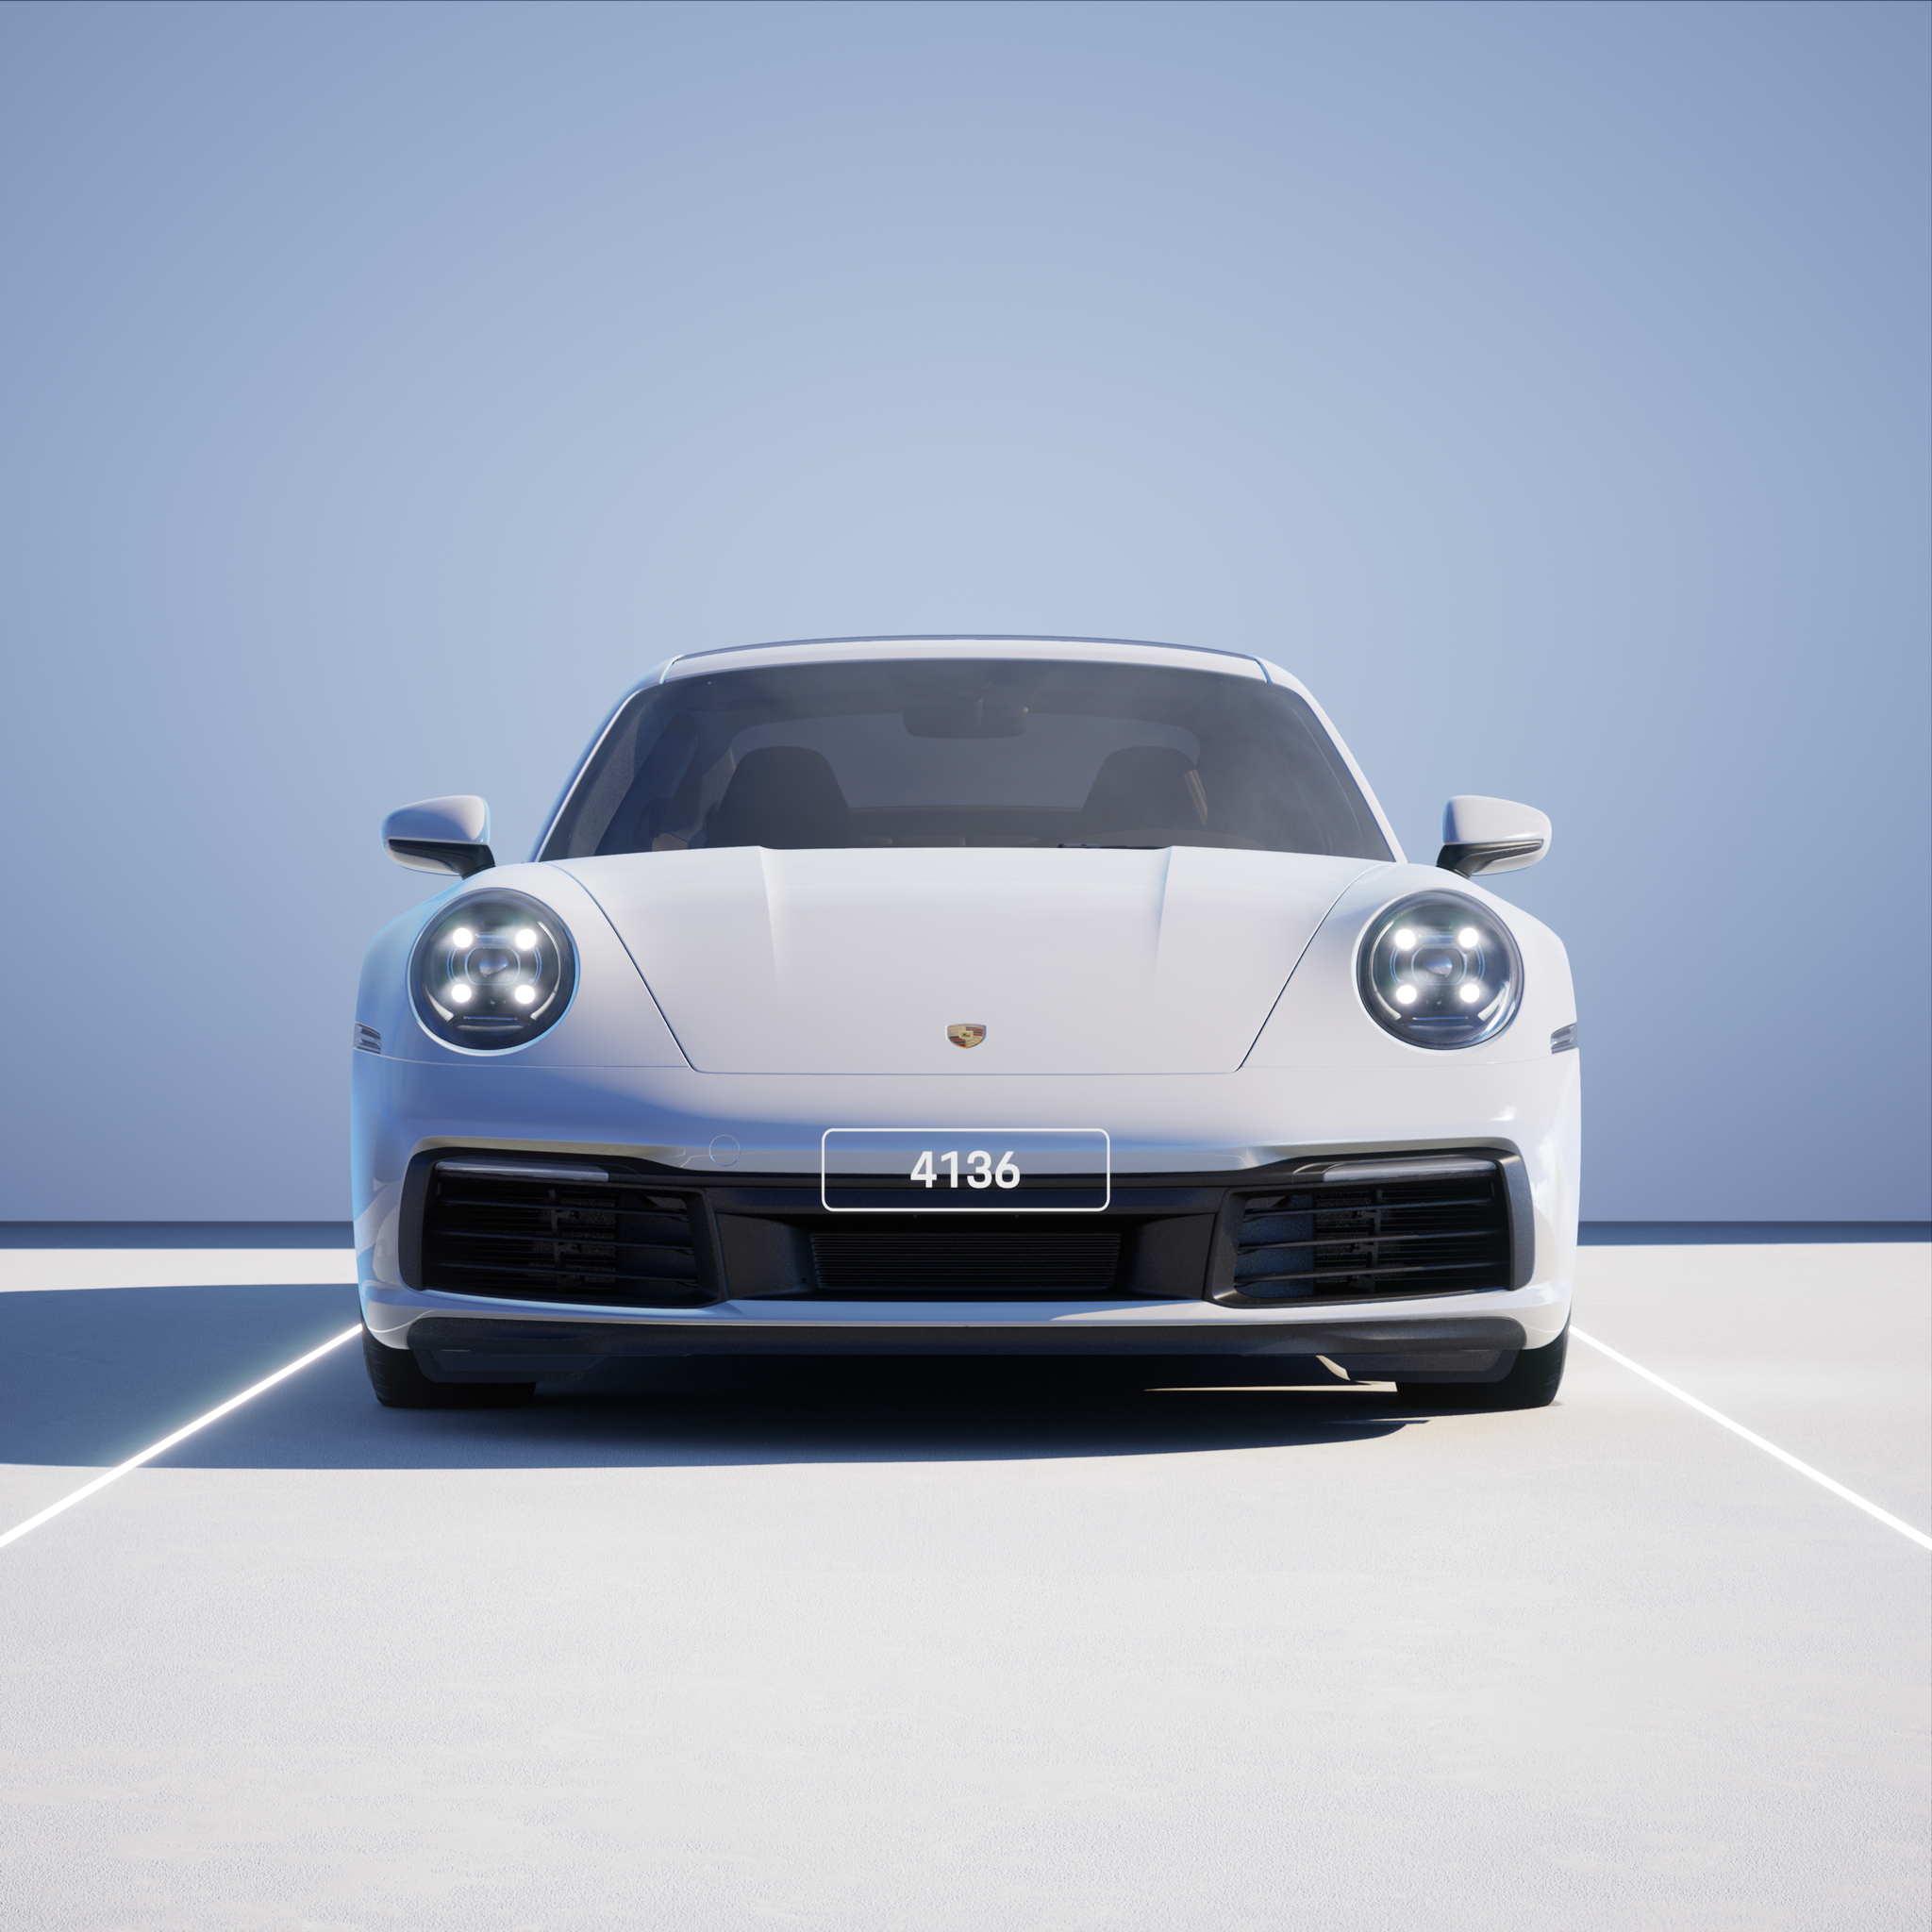 The PORSCHΞ 911 4136 image in phase